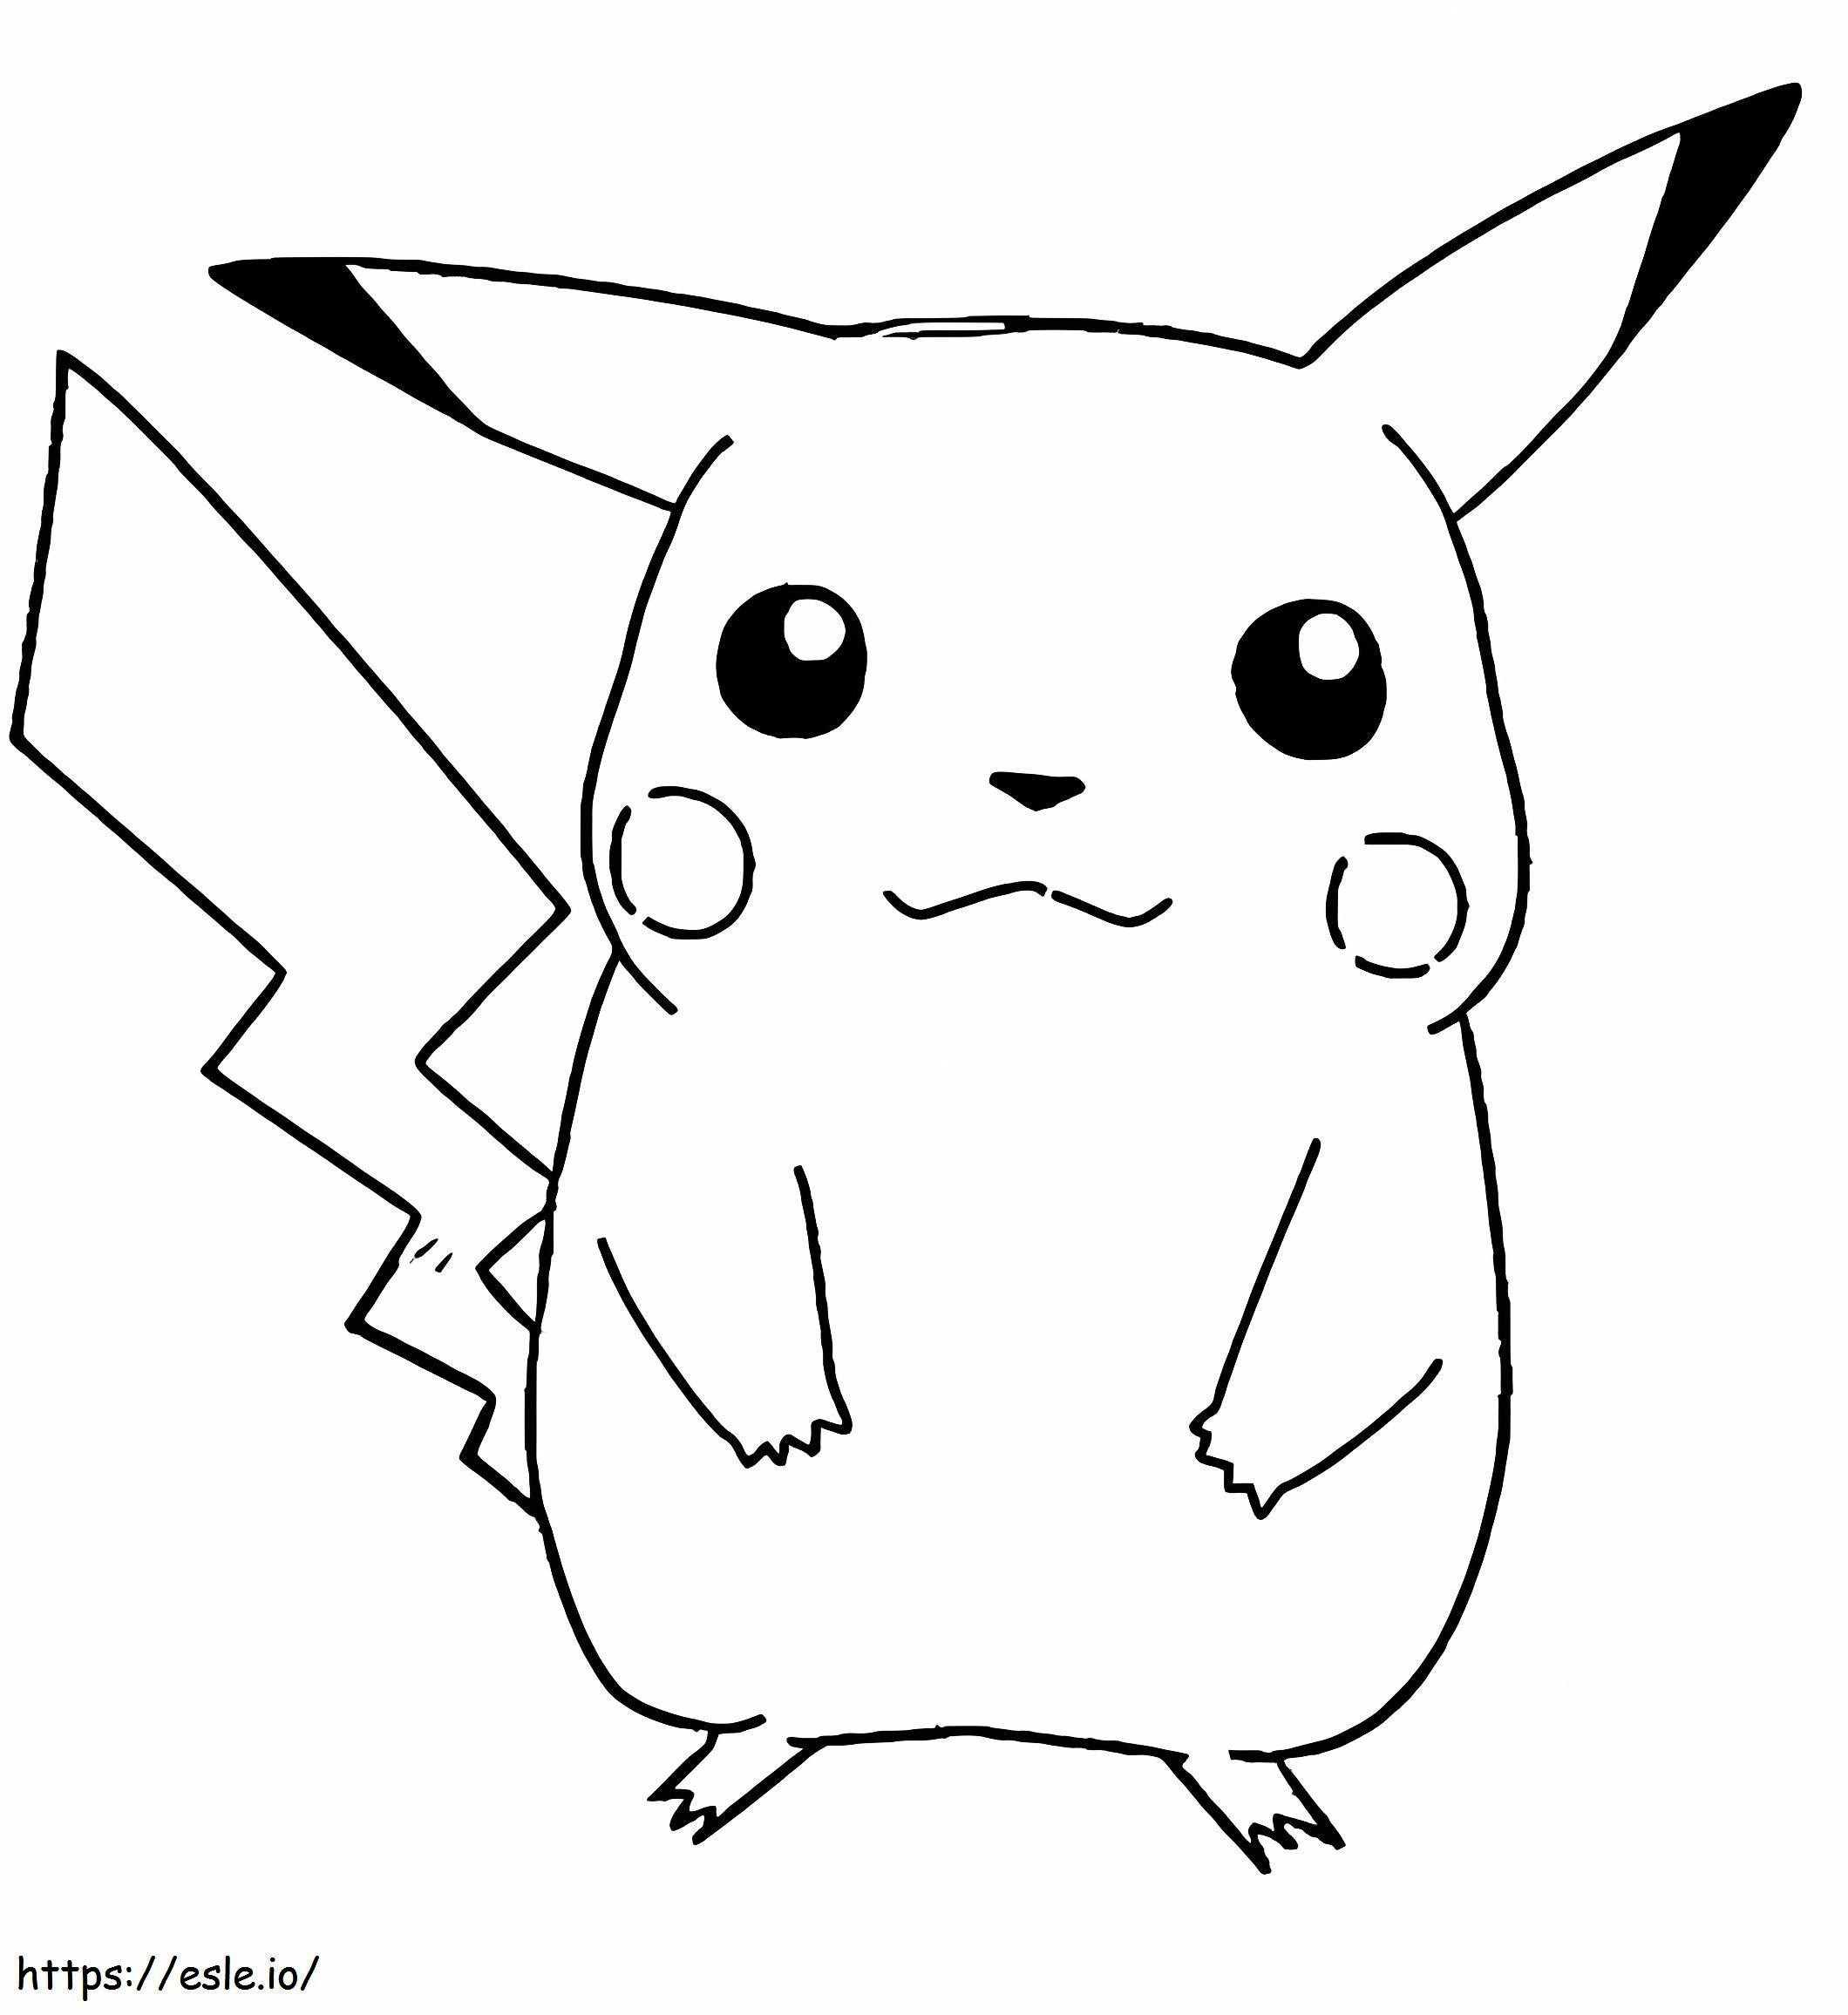 Fat Pikachu coloring page